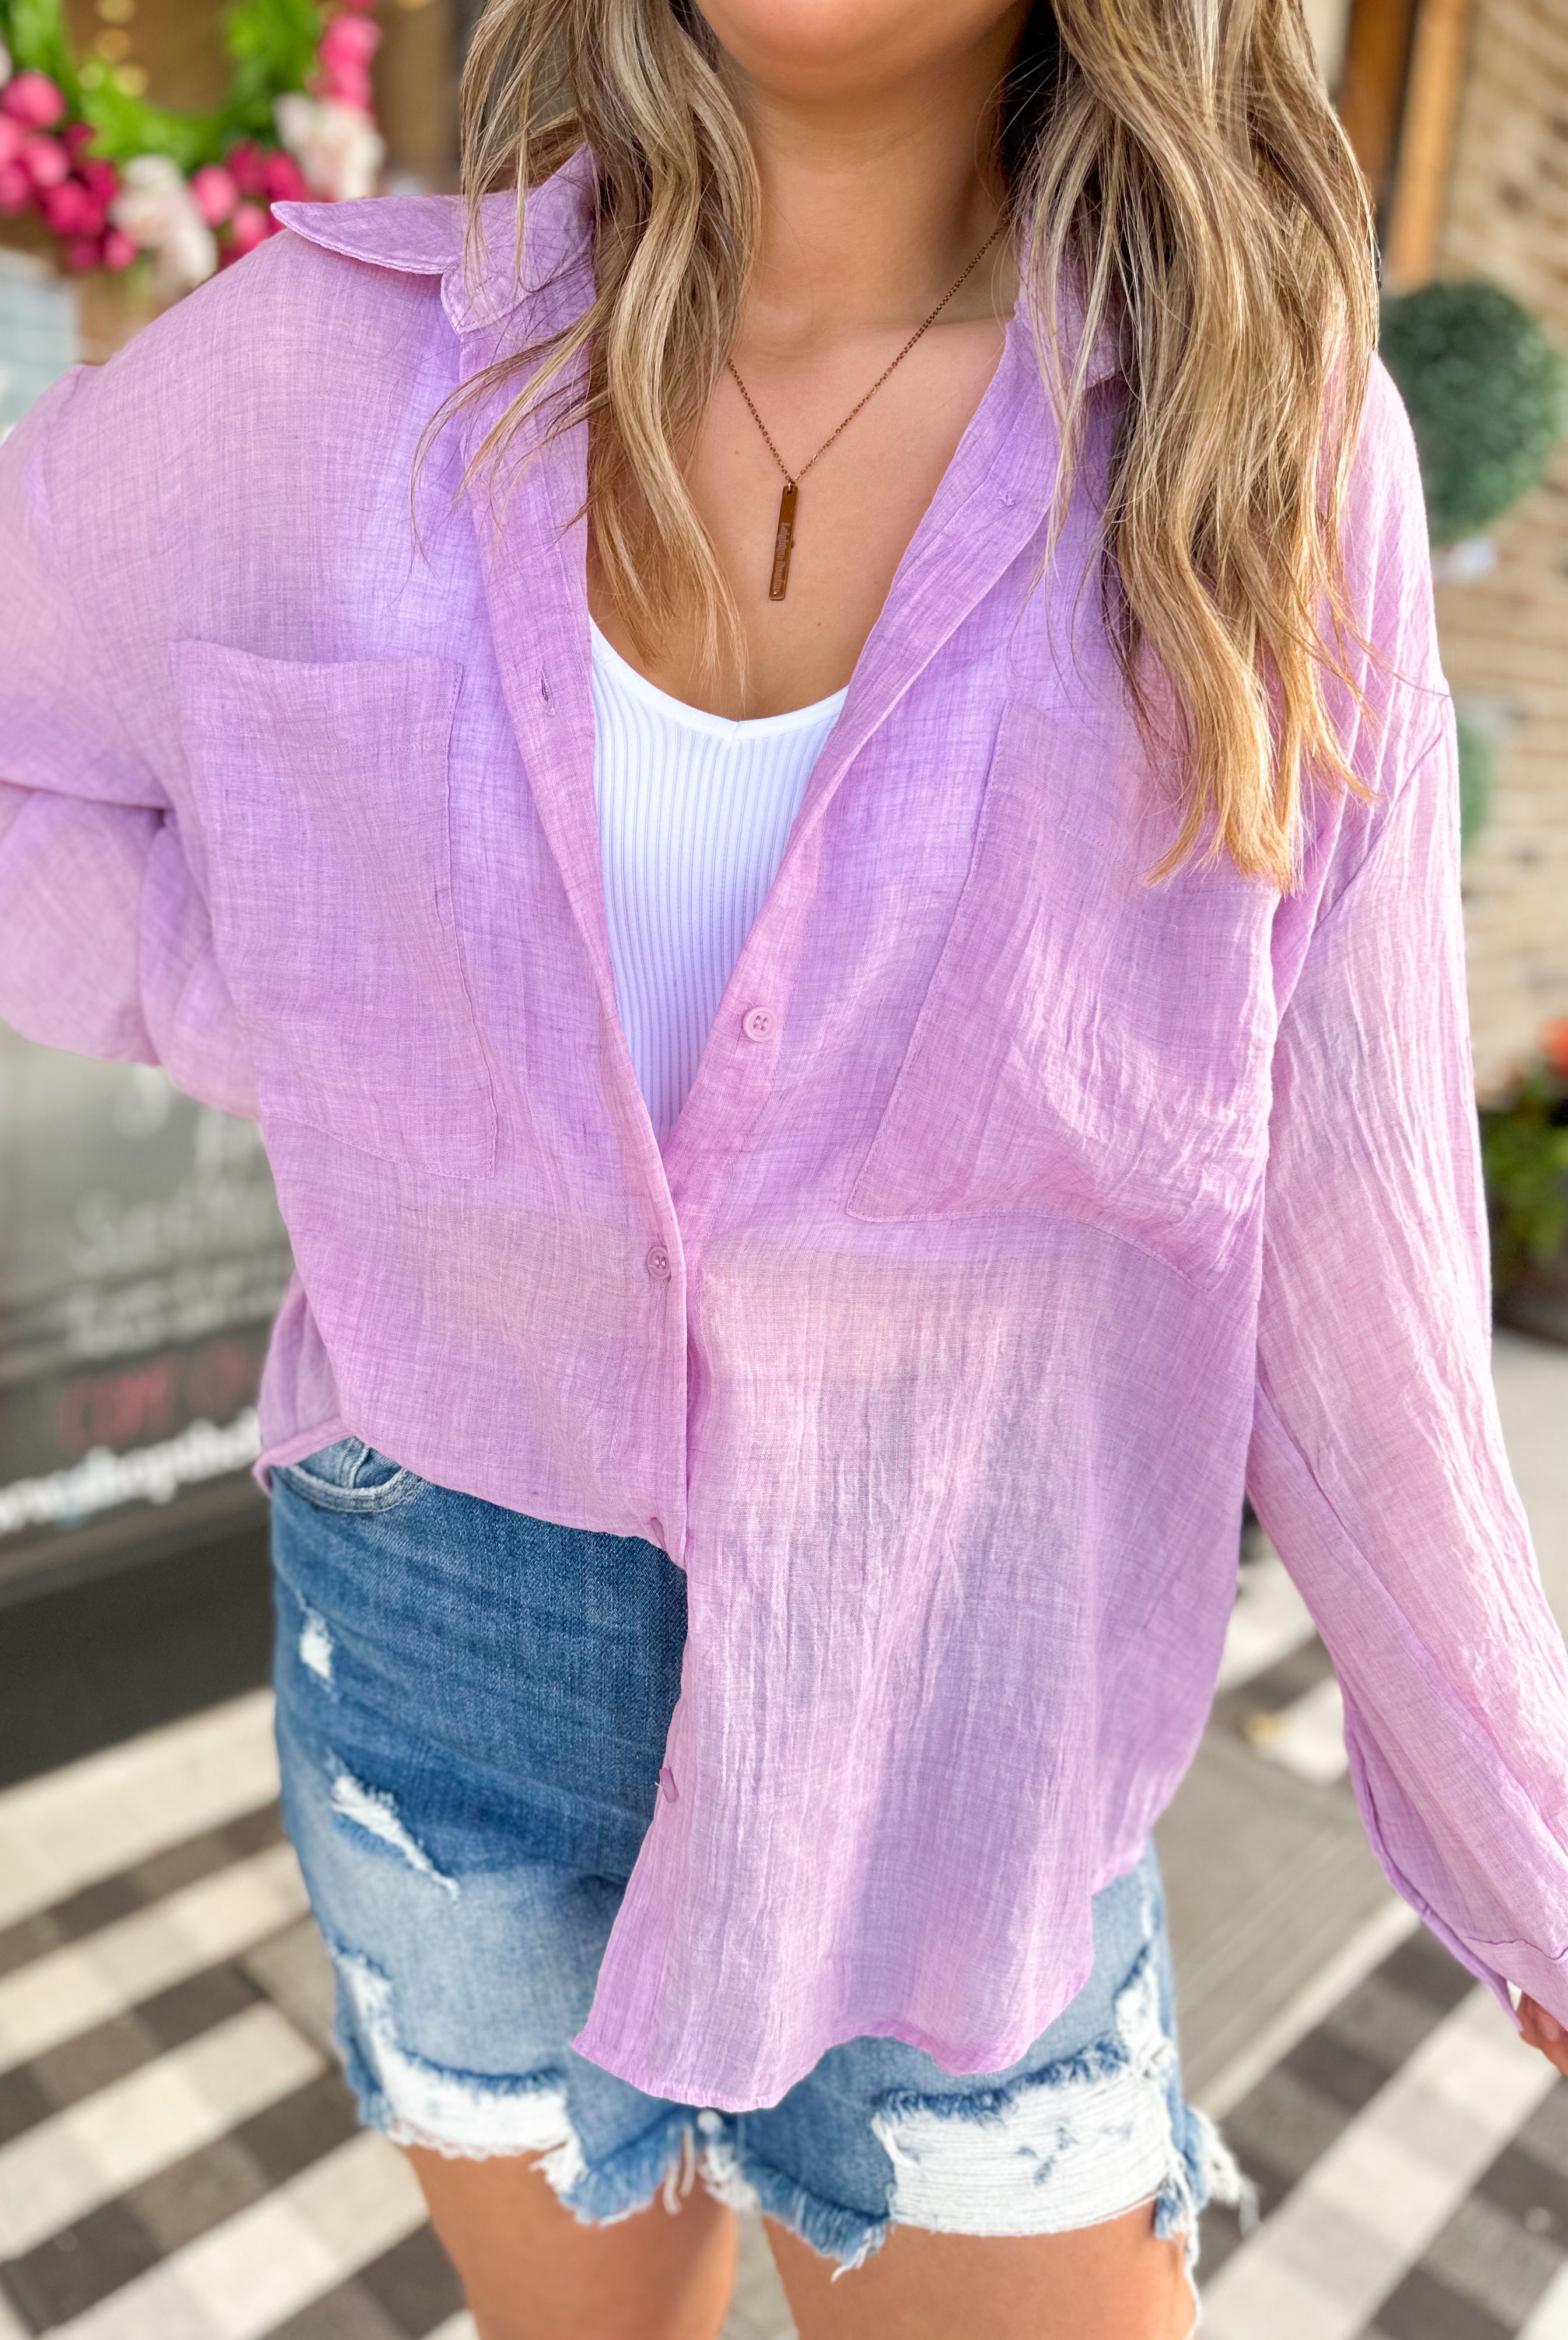 Kenny Long Sleeve Button Down Shirt Tunic - Be You Boutique